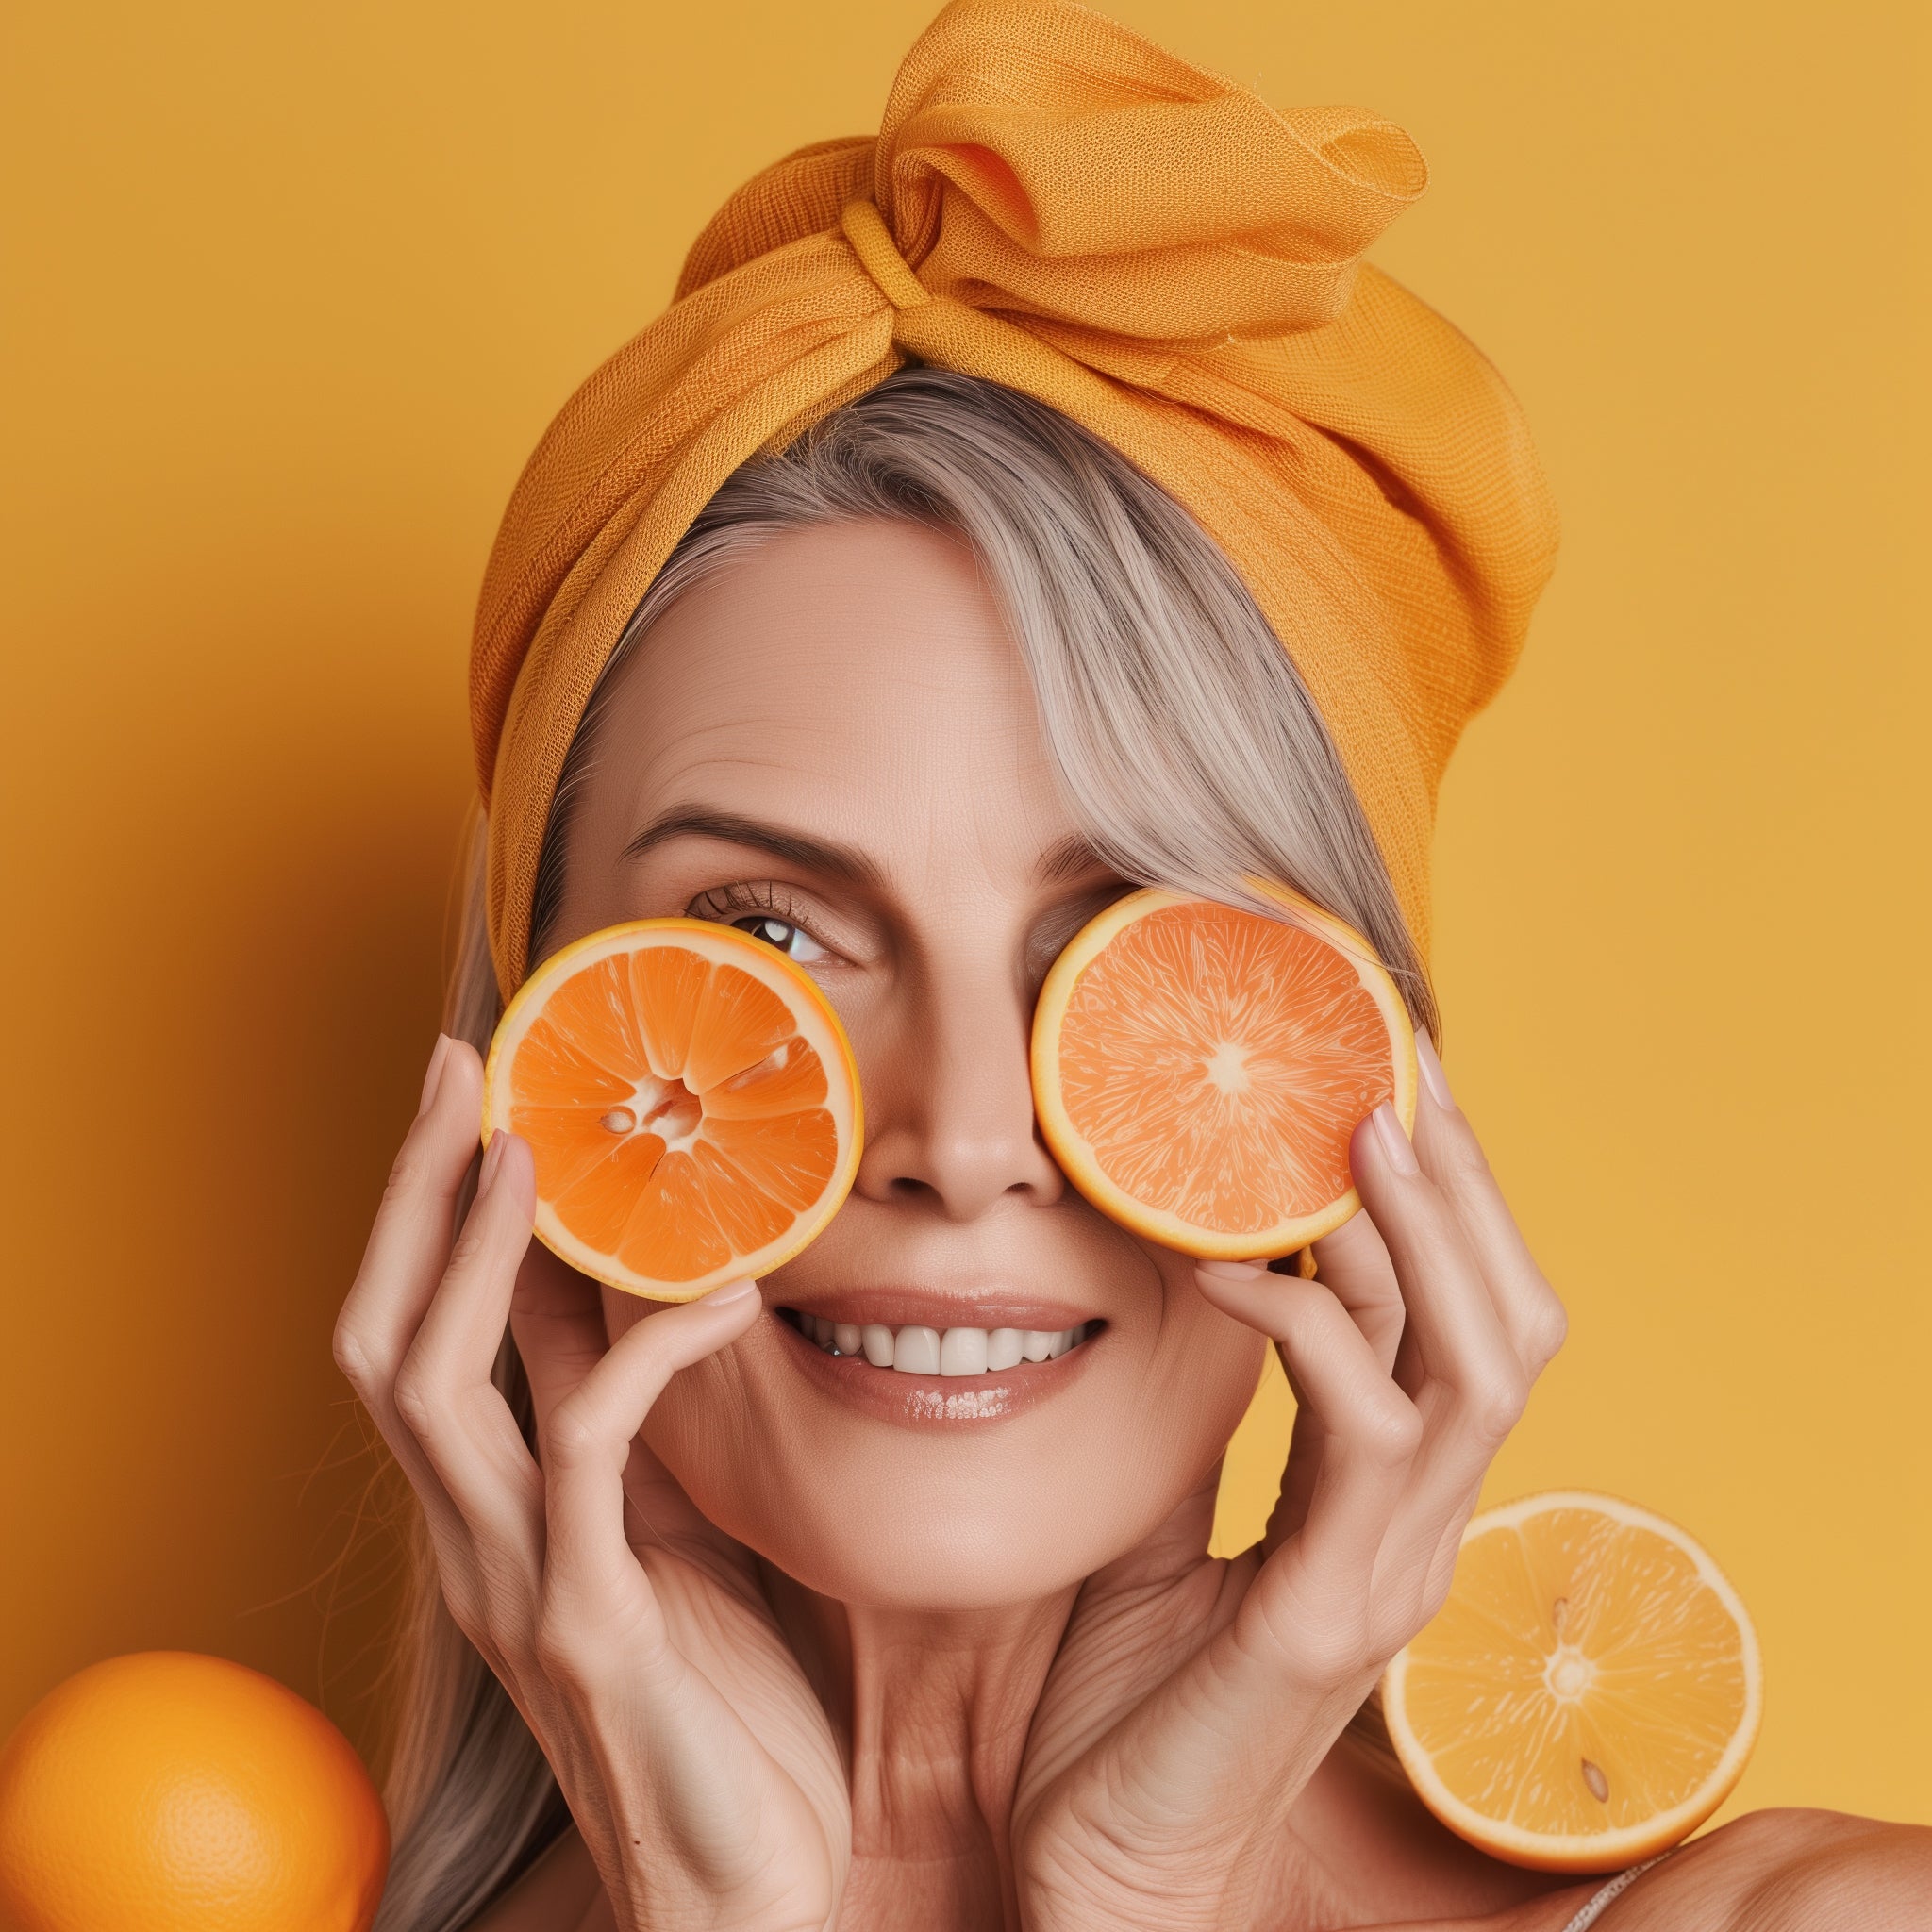 5 MYTHS TO IGNORE ABOUT VITAMIN C